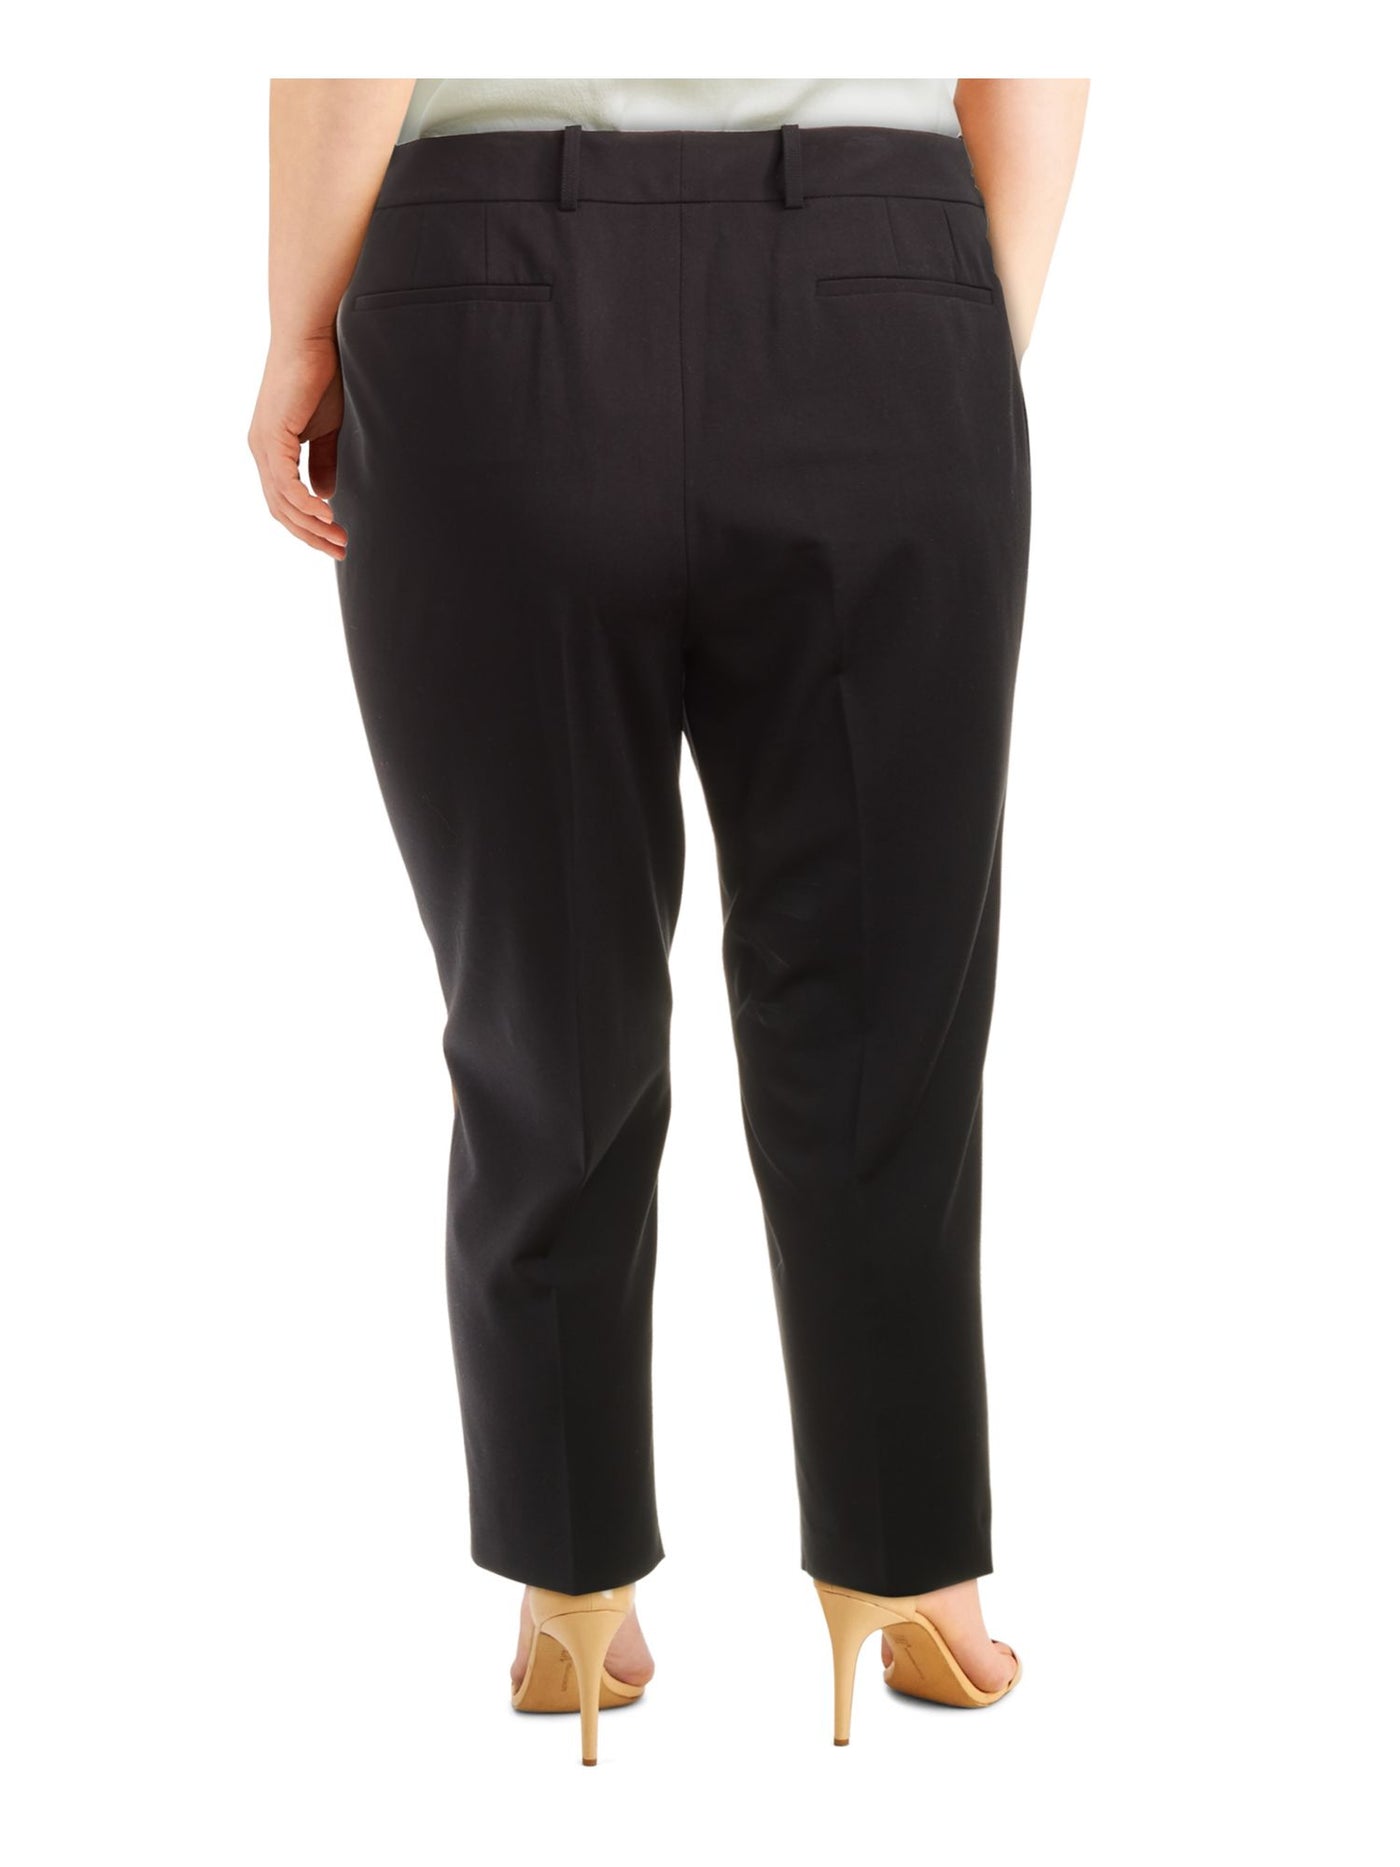 CALVIN KLEIN Womens Black Zippered Pocketed Cropped Wear To Work Straight leg Pants Plus 22W